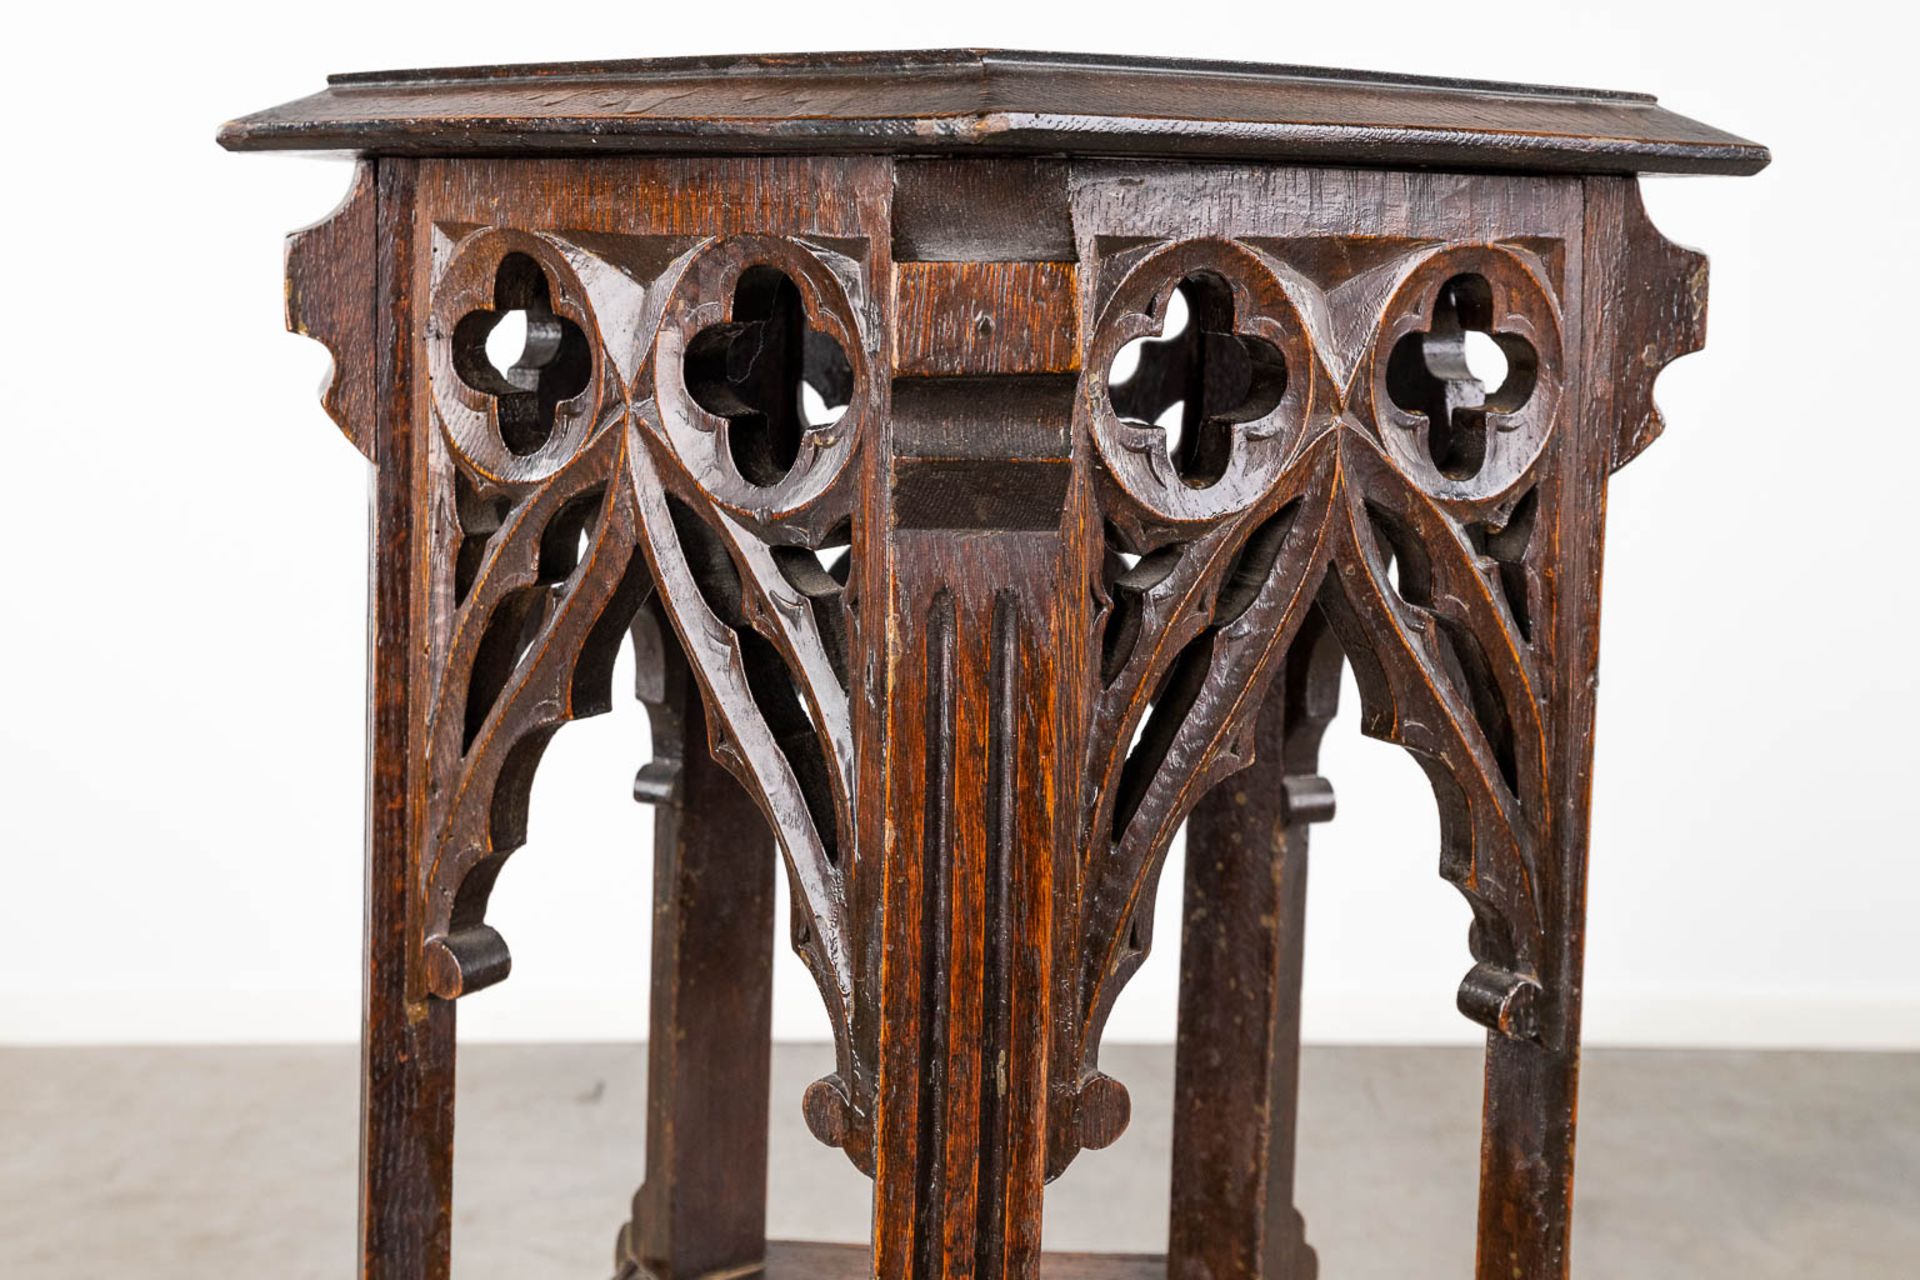 A pentagram pedestal, sculptured wood in Gothic Revival style. 19th C. (L: 41 x W: 46 x H: 111 cm) - Image 9 of 12